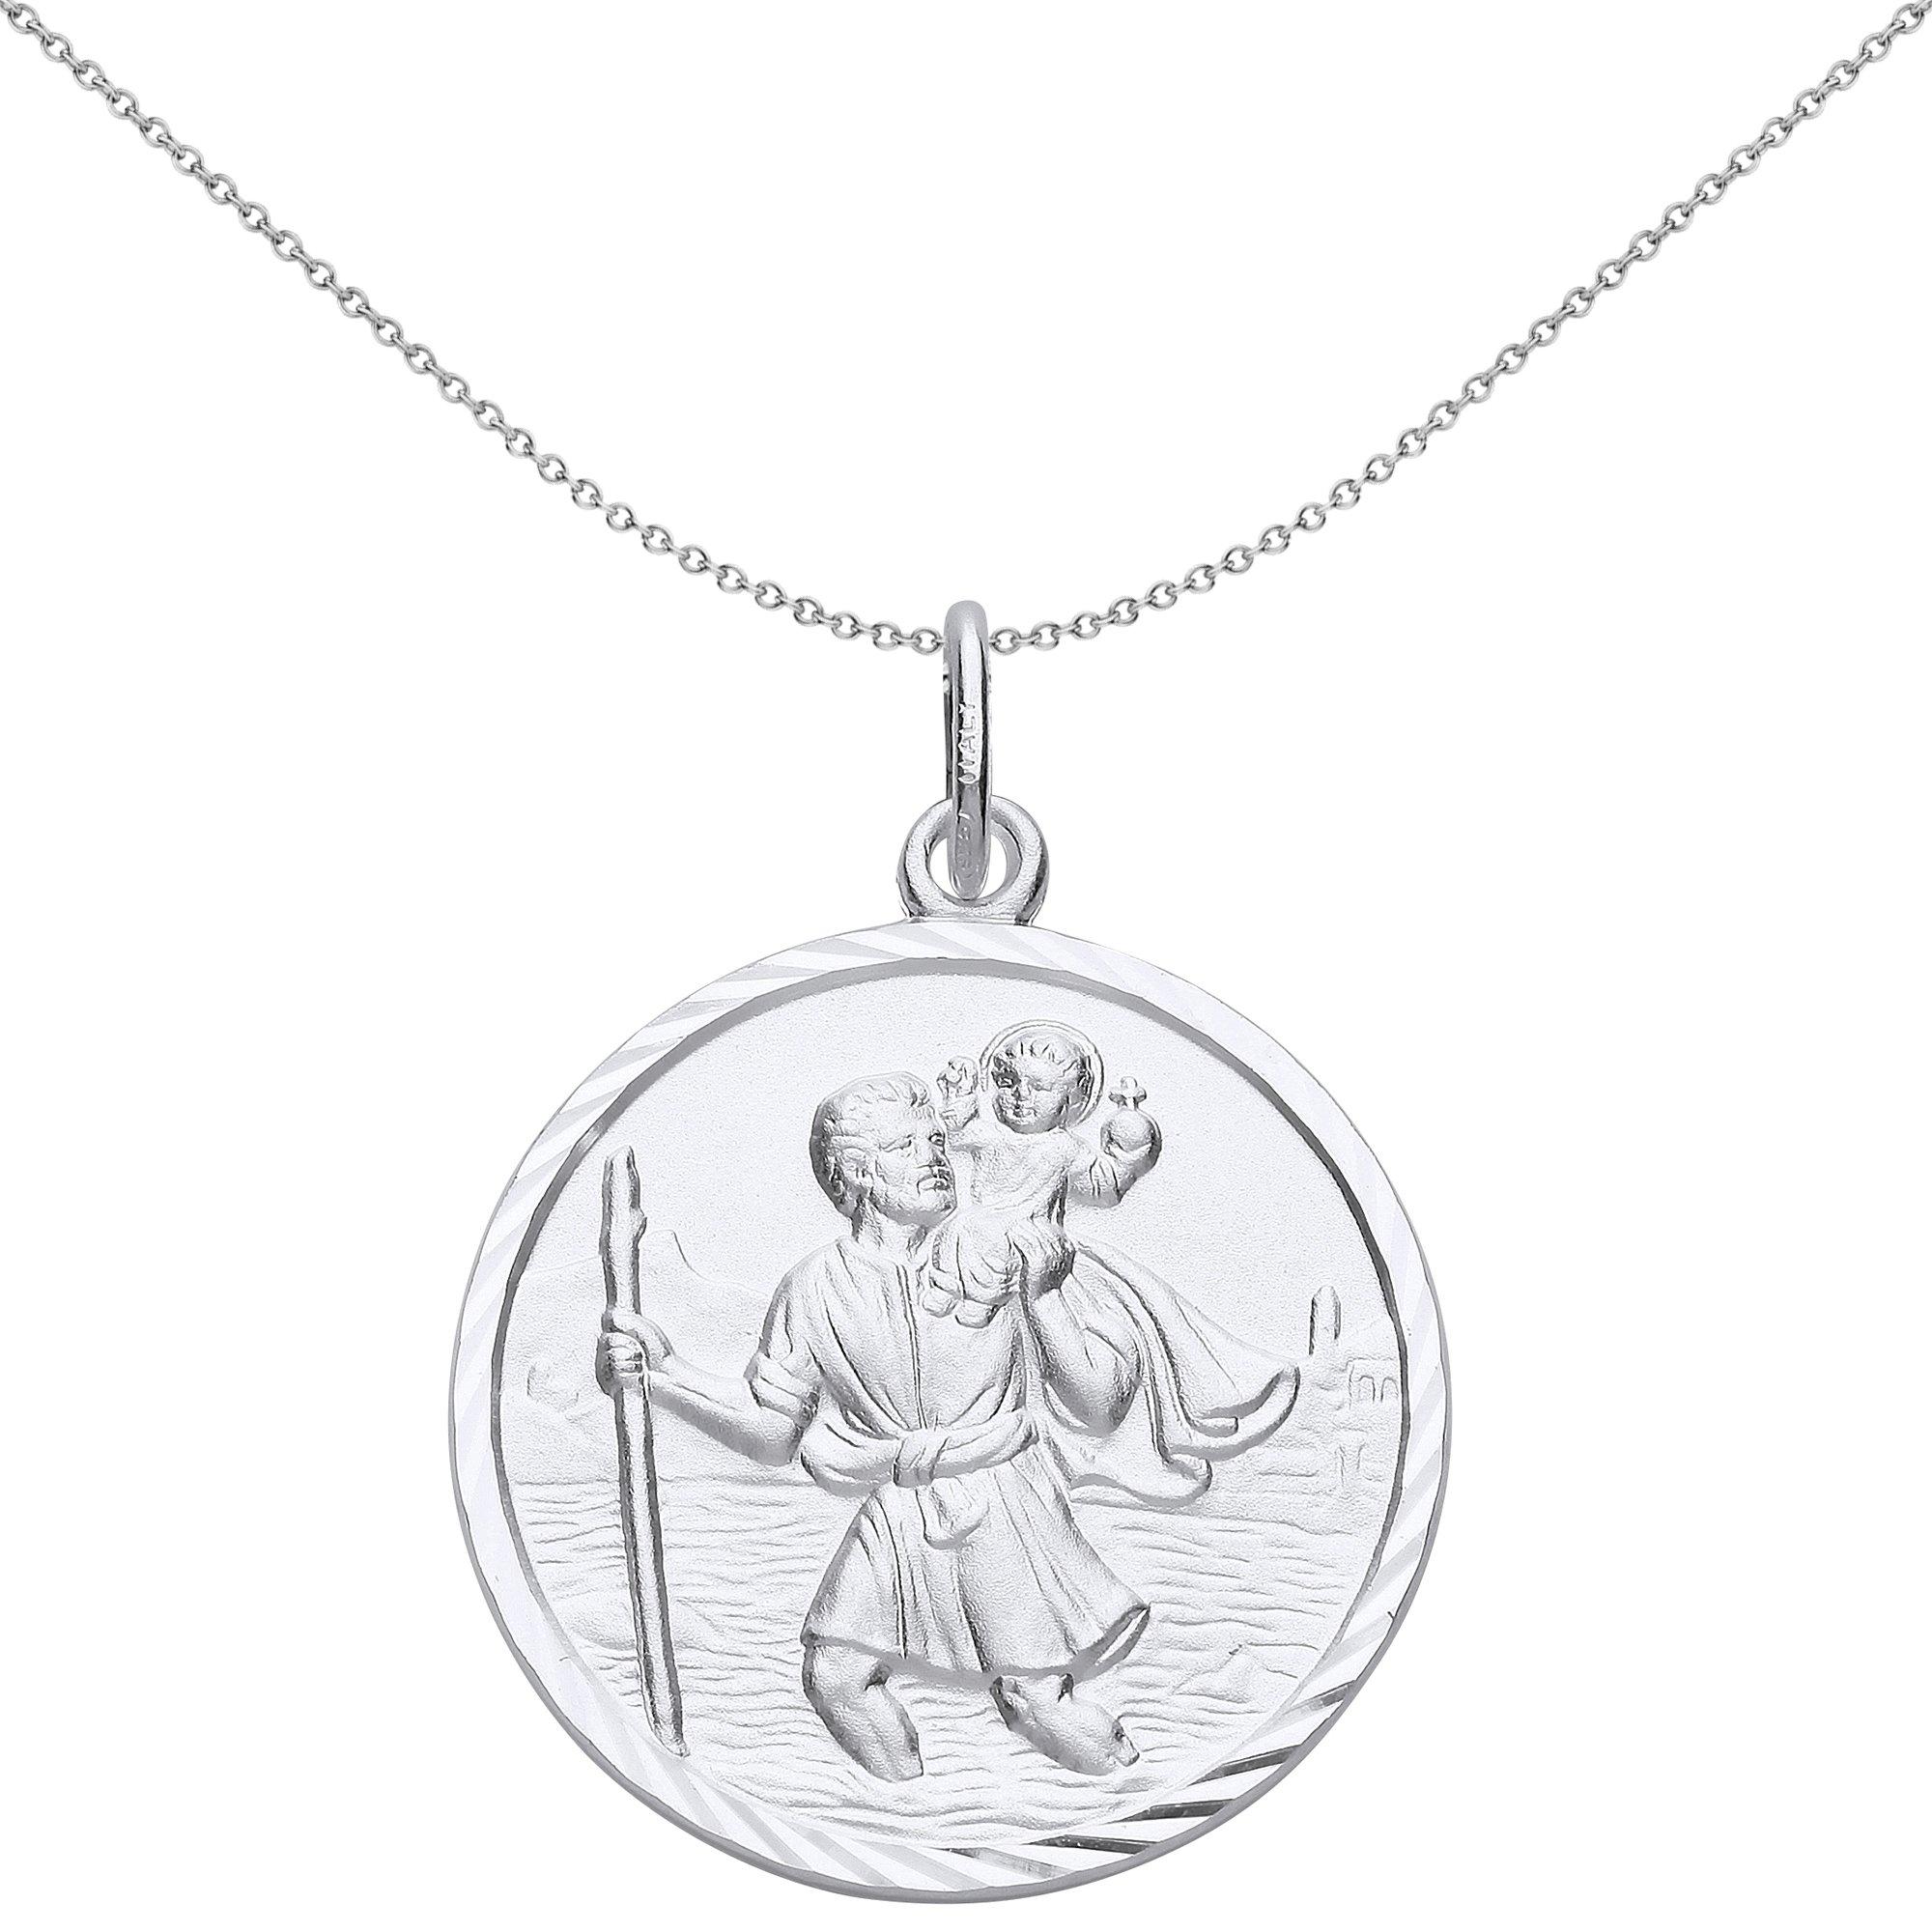 Silver  St Christopher Medallion Necklace 26mm 18 inch - GVP494